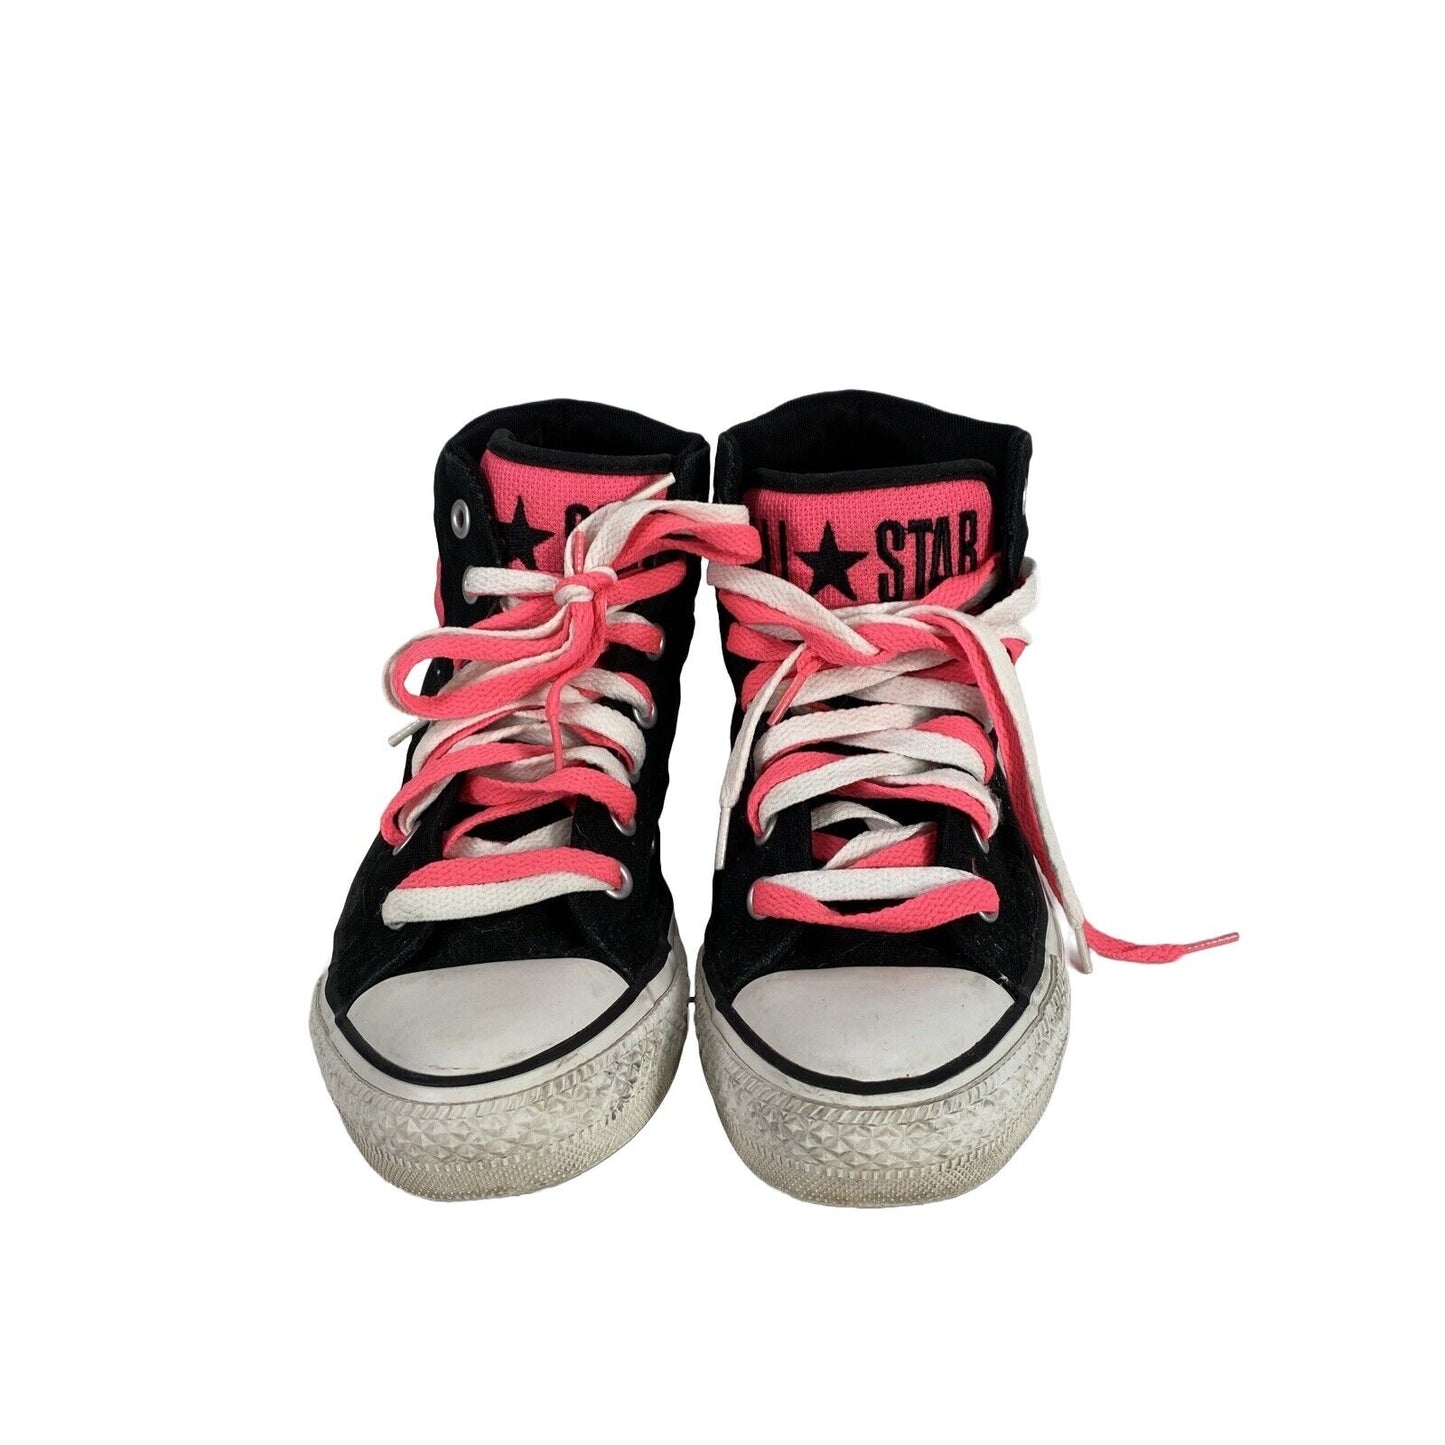 Converse All Star Girls Black/Pink Lace Up Casual Mid Top Sneakers - 5